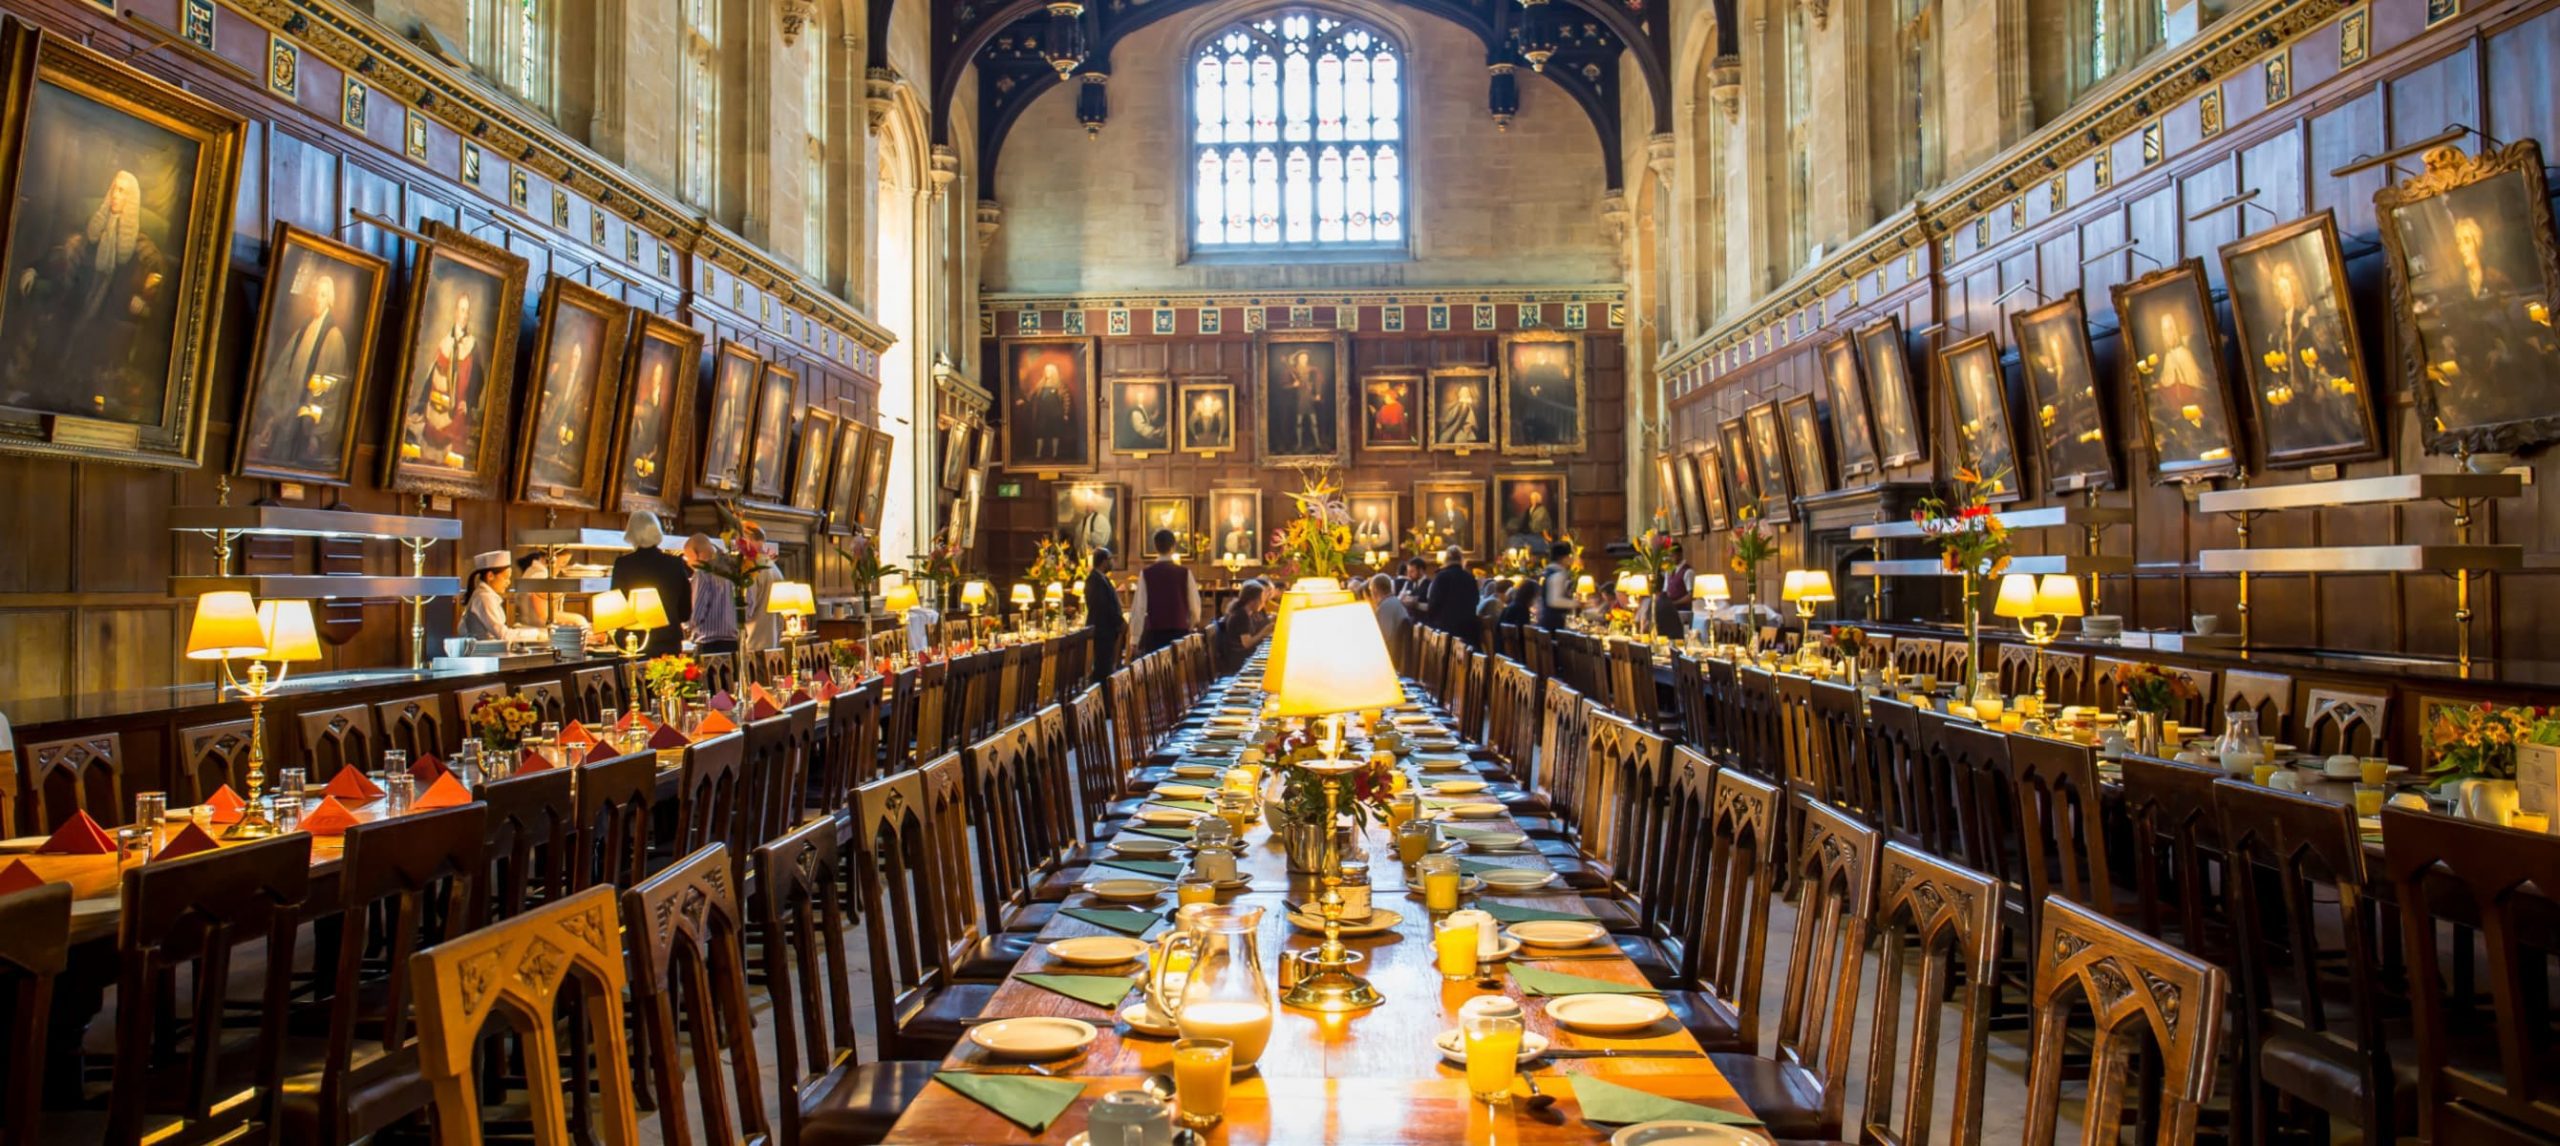 19 Top Harry Potter Filming Locations in the UK